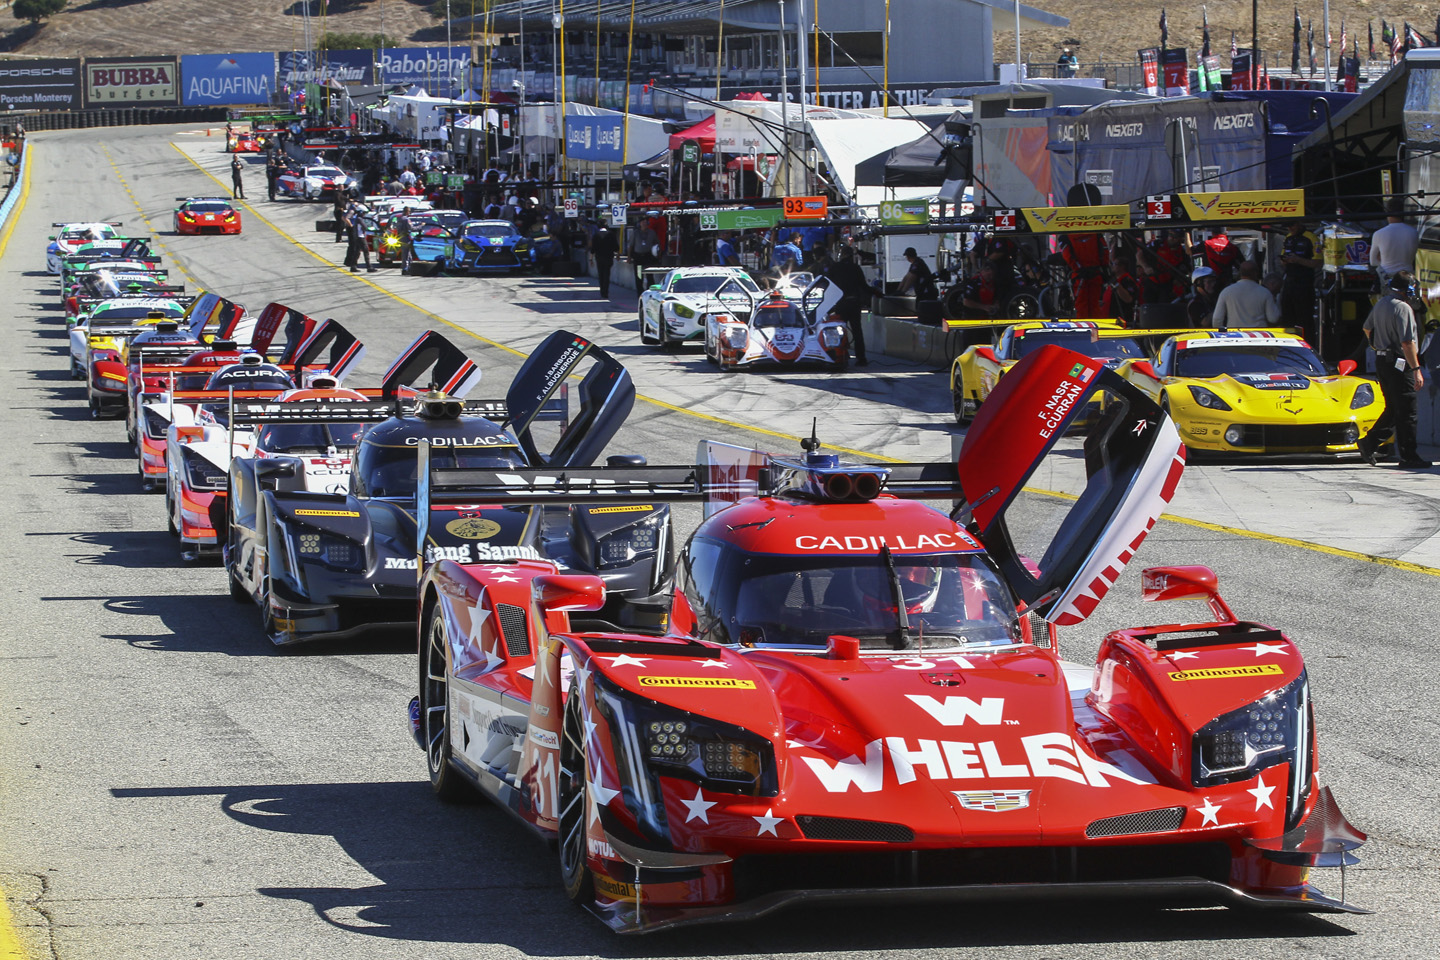 https://assets.simpleviewinc.com/simpleview/image/upload/crm/montereycounty/IMSA-Championship_WeatherTech-Raceway_Full-Rights-c0ae88ba5056a36_c0ae89a5-5056-a36a-0a01121312e574b2.jpg